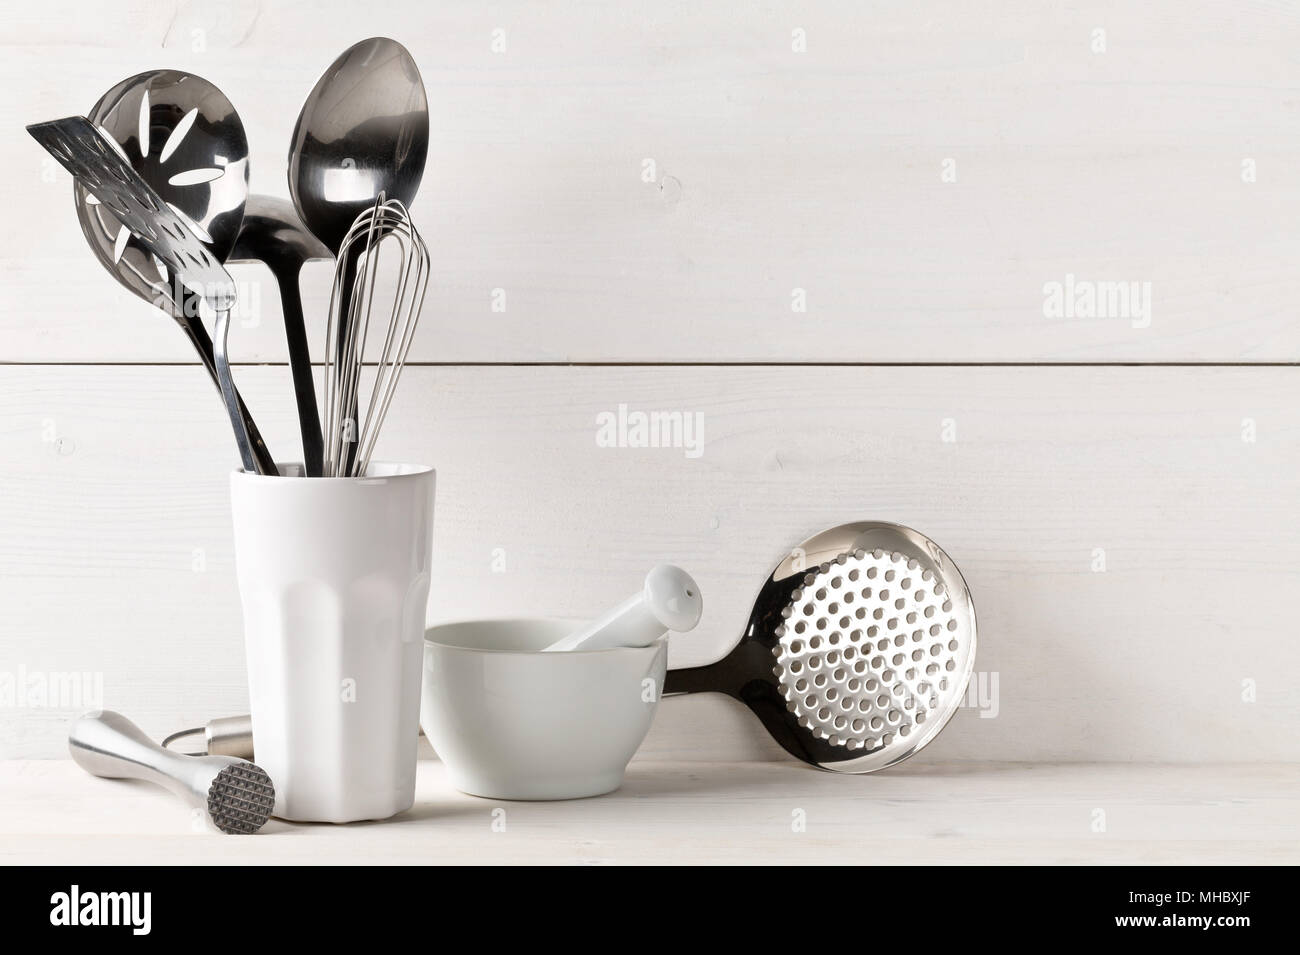 https://c8.alamy.com/comp/MHBXJF/kitchen-cooking-utensils-in-white-cup-with-pestle-and-mortar-on-white-table-with-white-wooden-board-background-MHBXJF.jpg